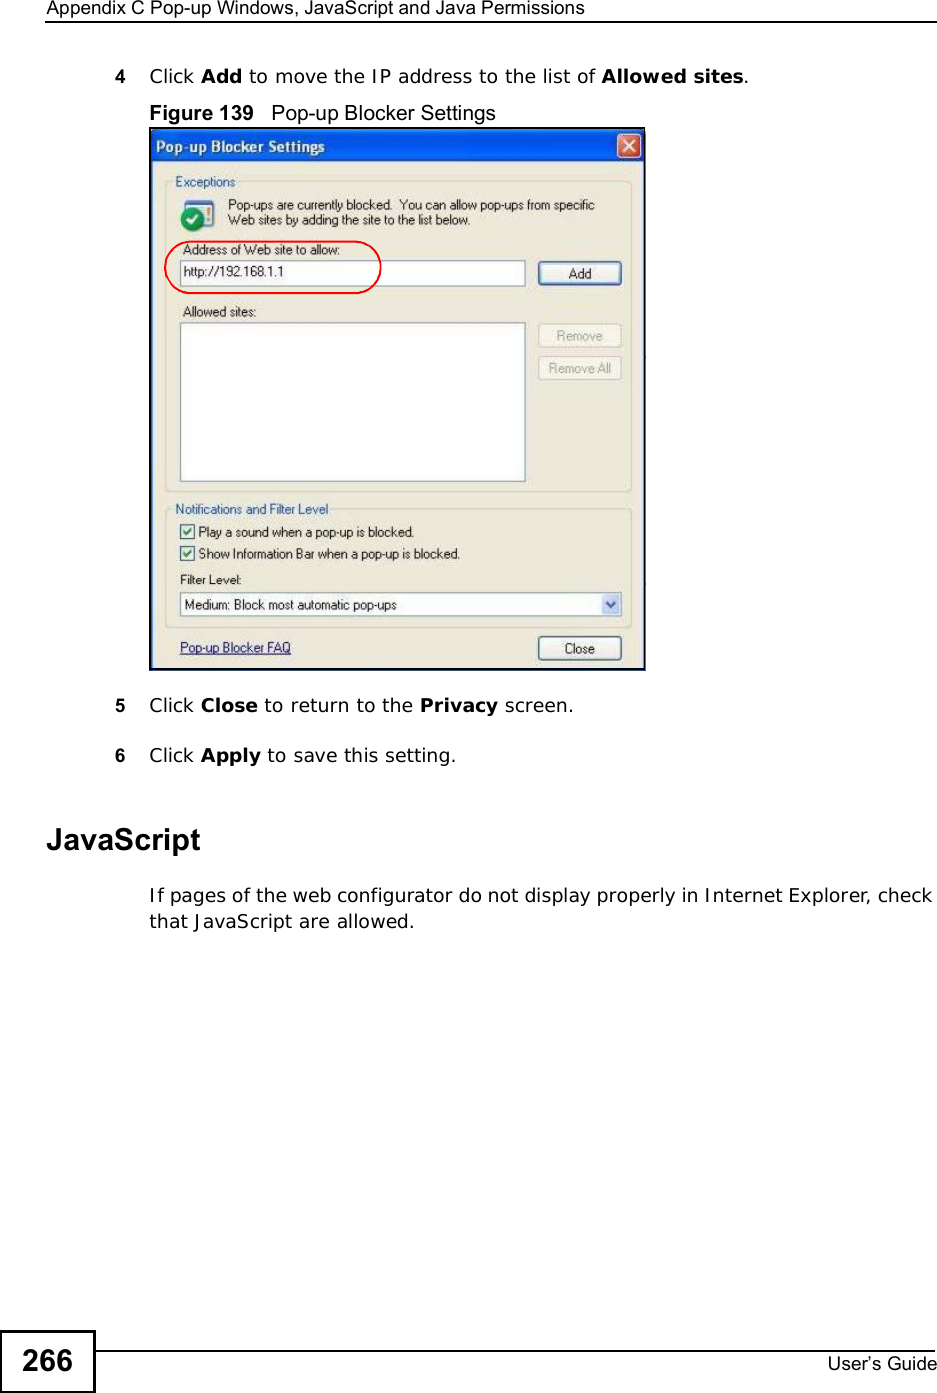 Appendix CPop-up Windows, JavaScript and Java PermissionsUser s Guide2664Click Add to move the IP address to the list of Allowed sites.Figure 139   Pop-up Blocker Settings5Click Close to return to the Privacy screen. 6Click Apply to save this setting. JavaScriptIf pages of the web configurator do not display properly in Internet Explorer, check that JavaScript are allowed. 